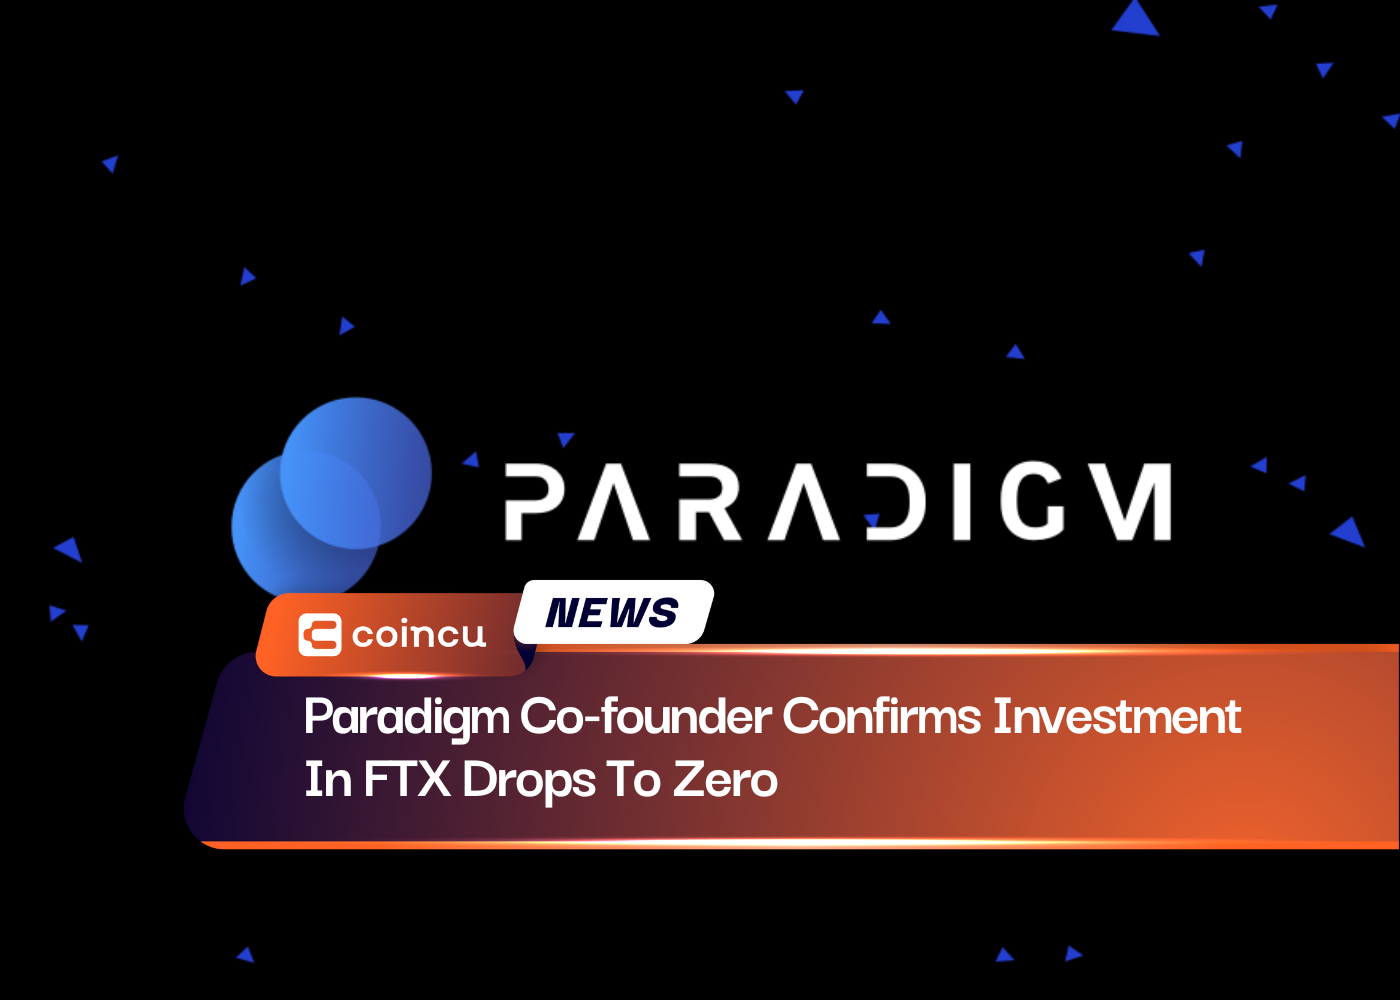 Paradigm Co-founder Confirms Investment In FTX Drops To Zero